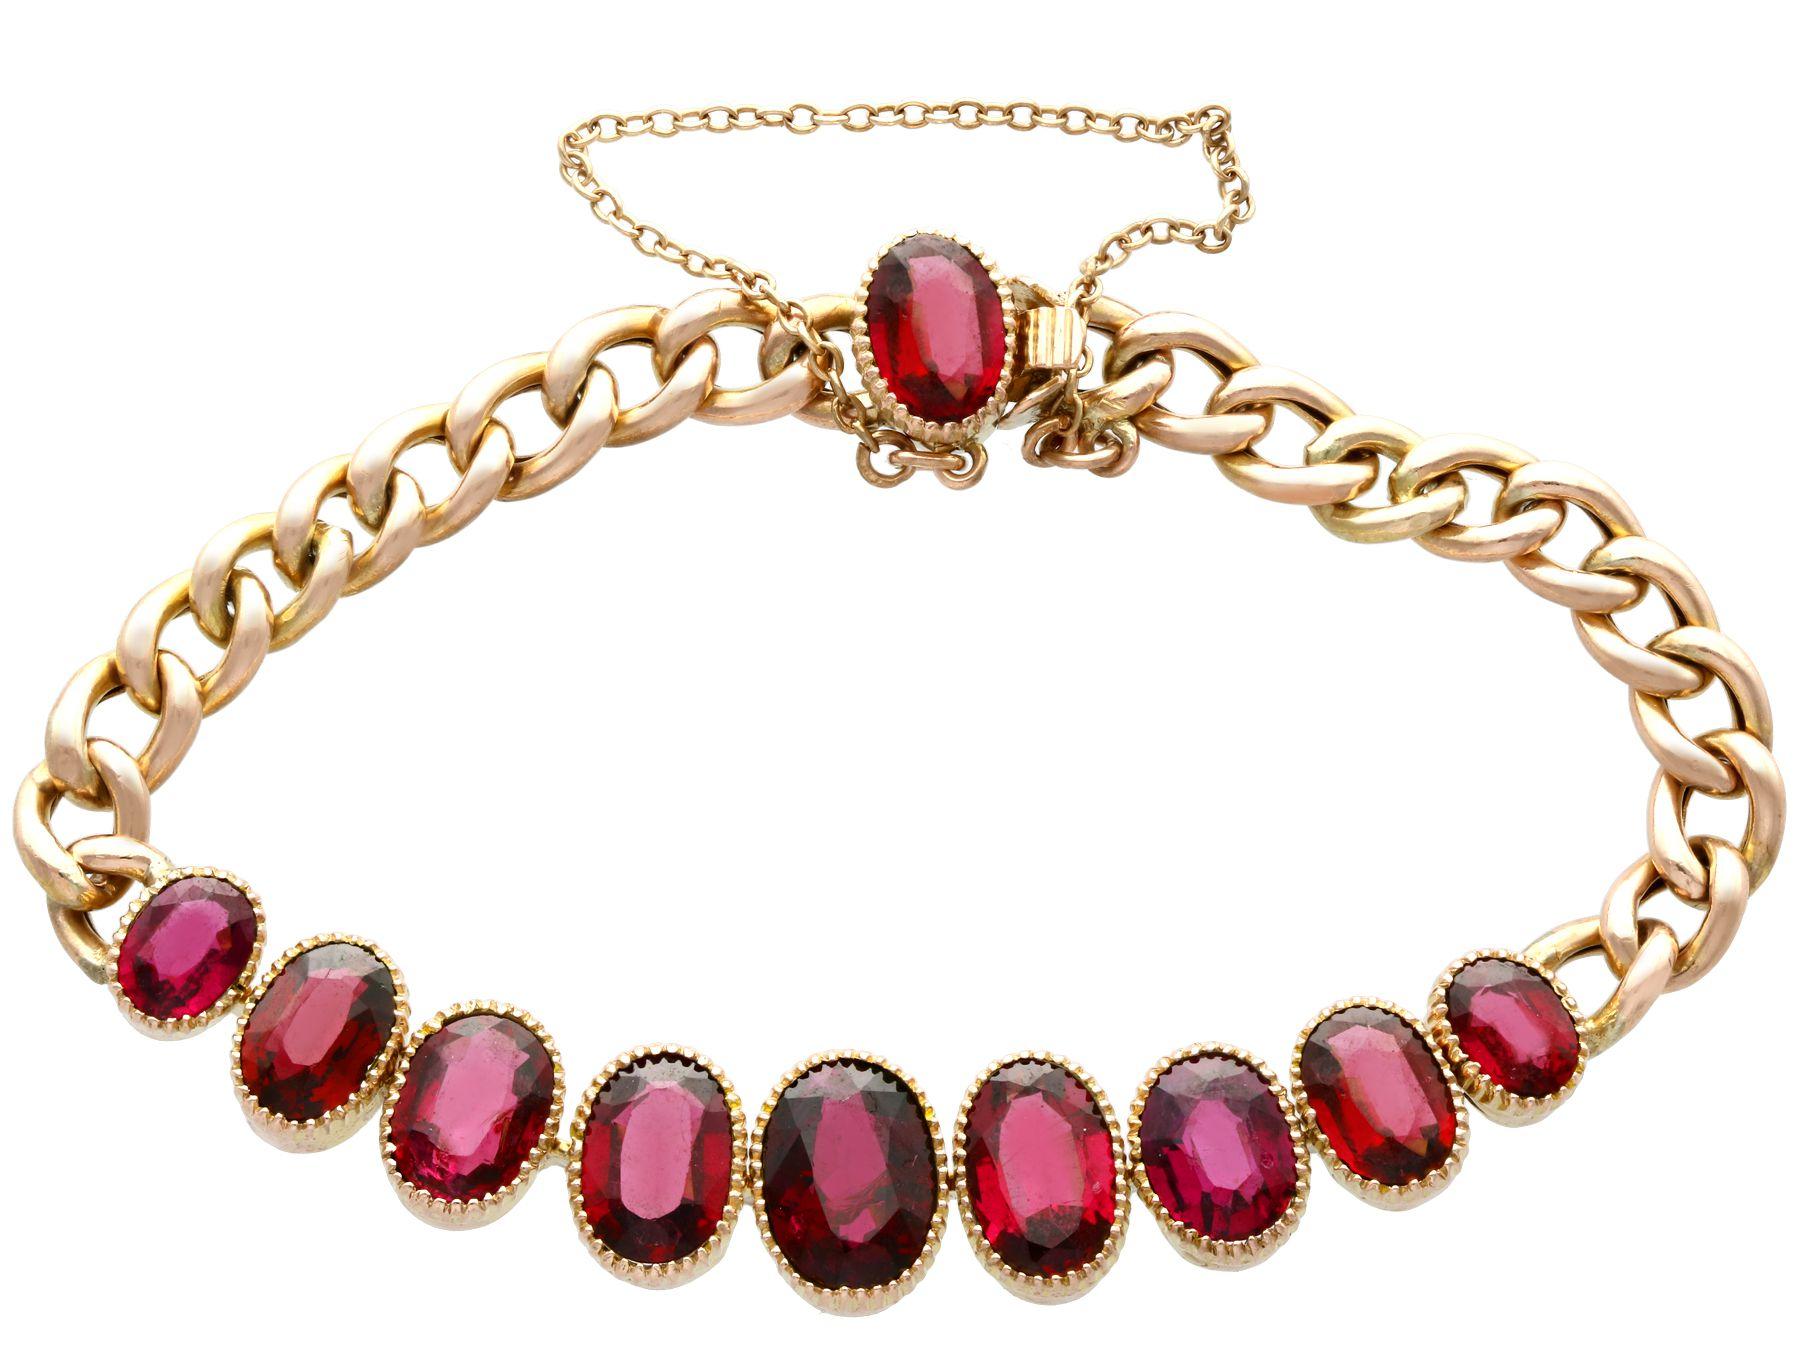 A fine and impressive antique bracelet in 9 karat yellow gold, embellished with 12.84 carat garnets; part of our bangle and bracelet collection.

This fine and impressive antique oval cut garnet bracelet has been crafted in 9k yellow gold.

The